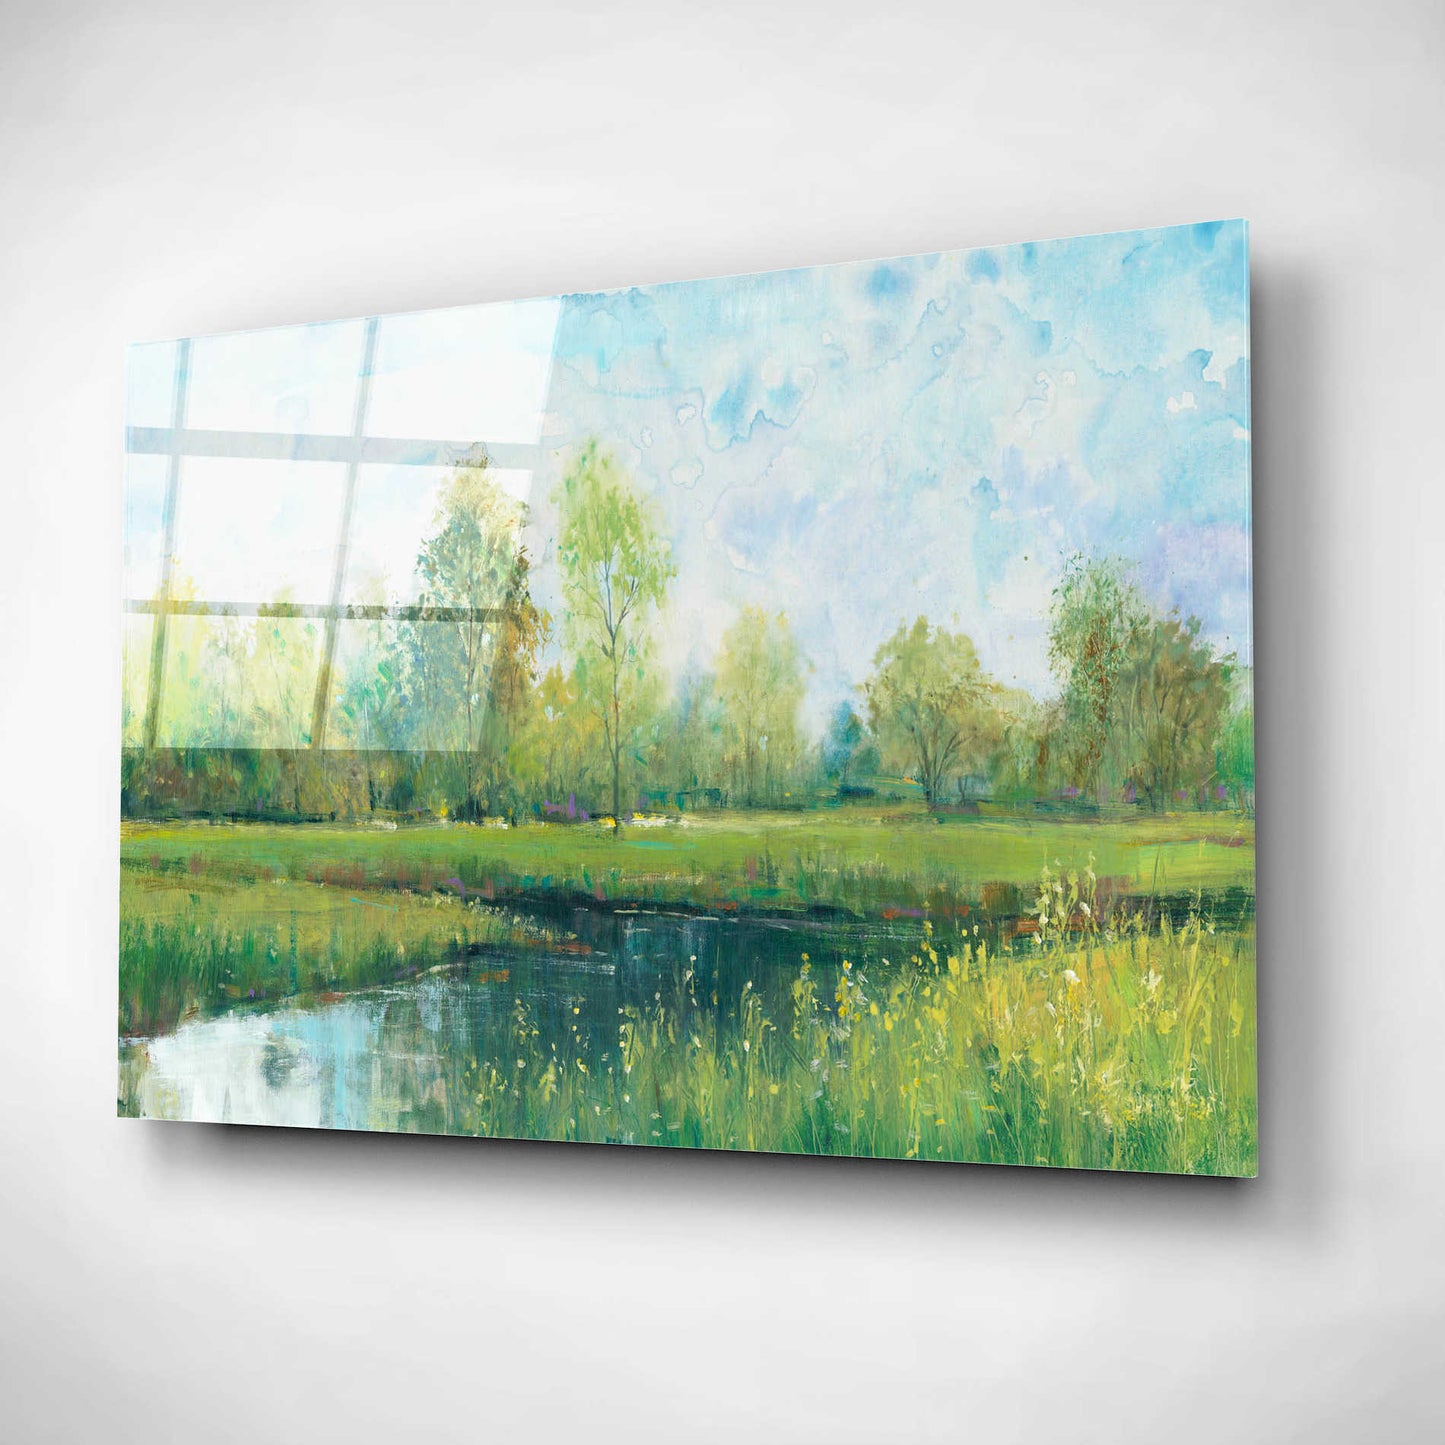 Epic Art 'Tranquil Park I' by Tim O'Toole, Acrylic Glass Wall Art,24x16